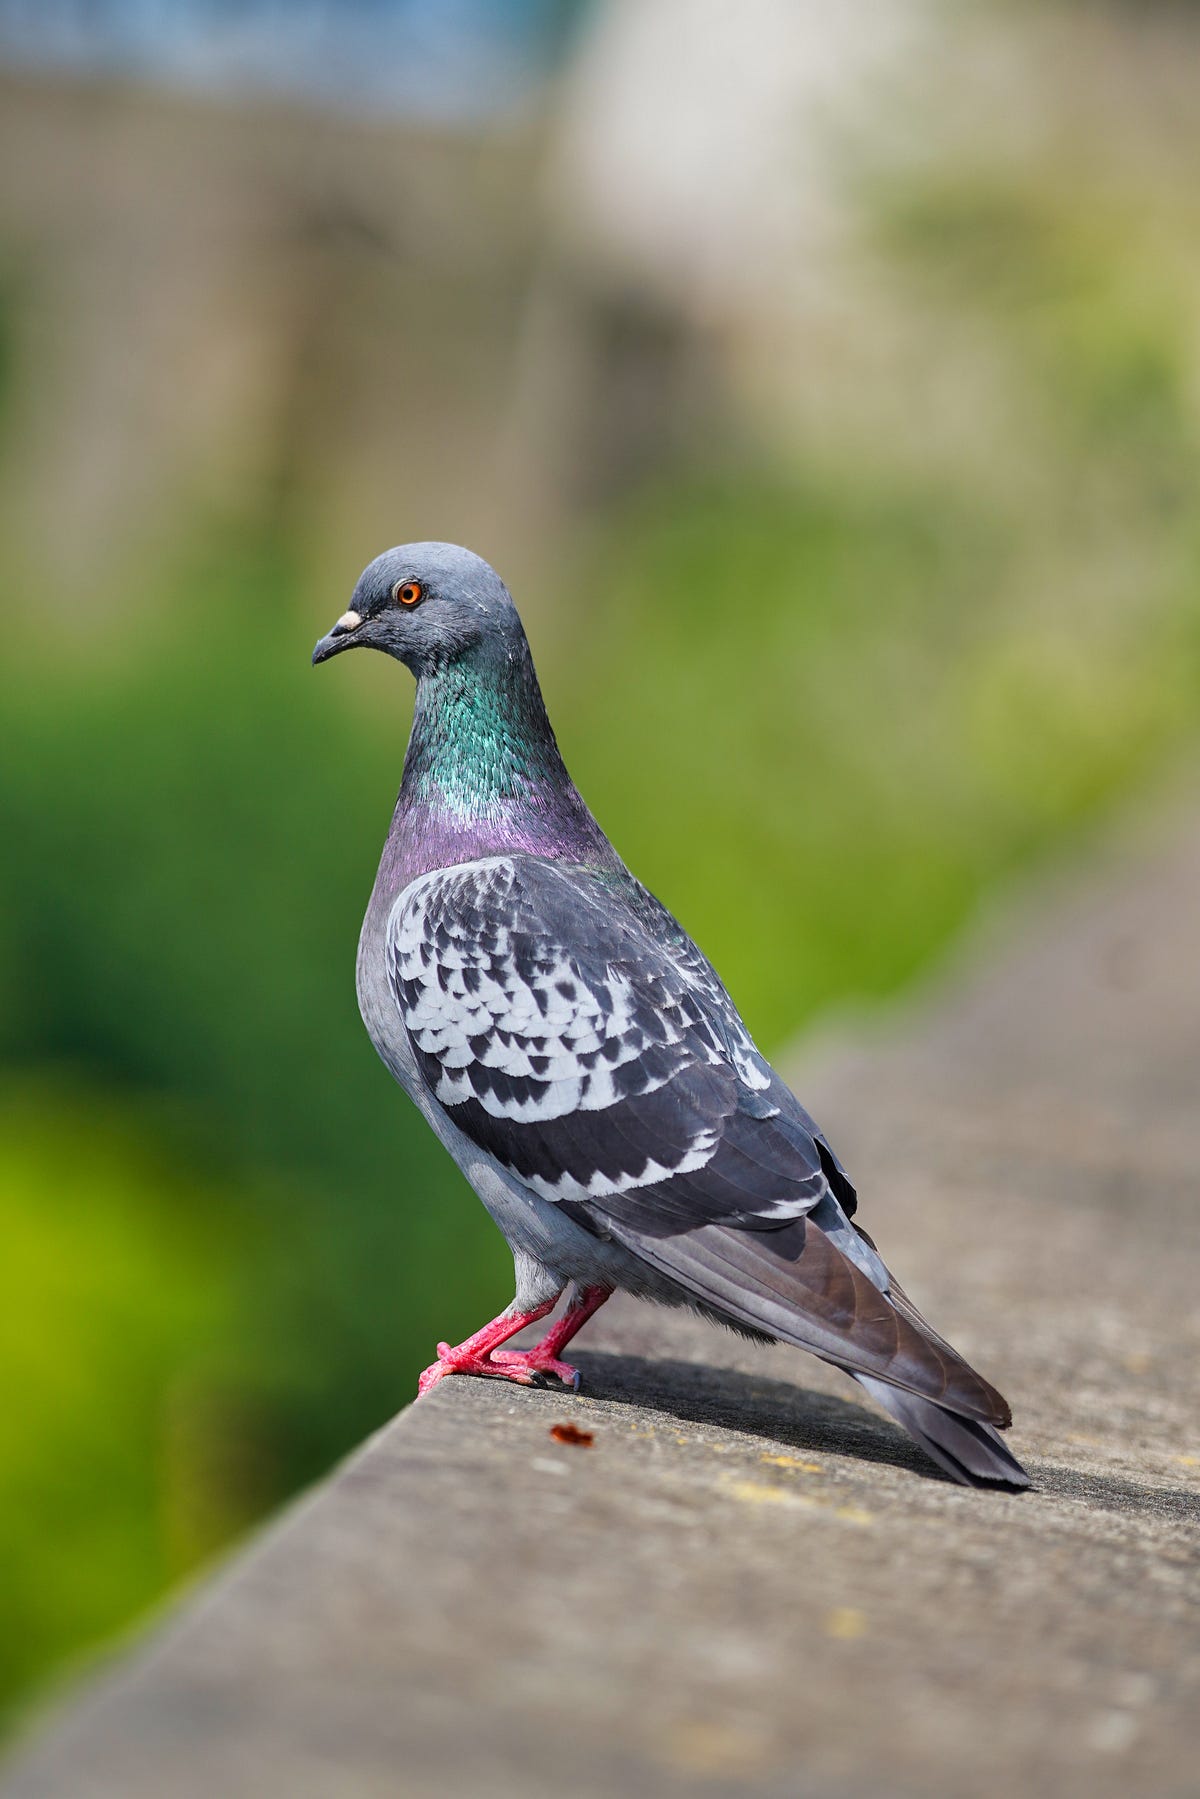 9 reasons why you should love pigeons - The Friends of Tower